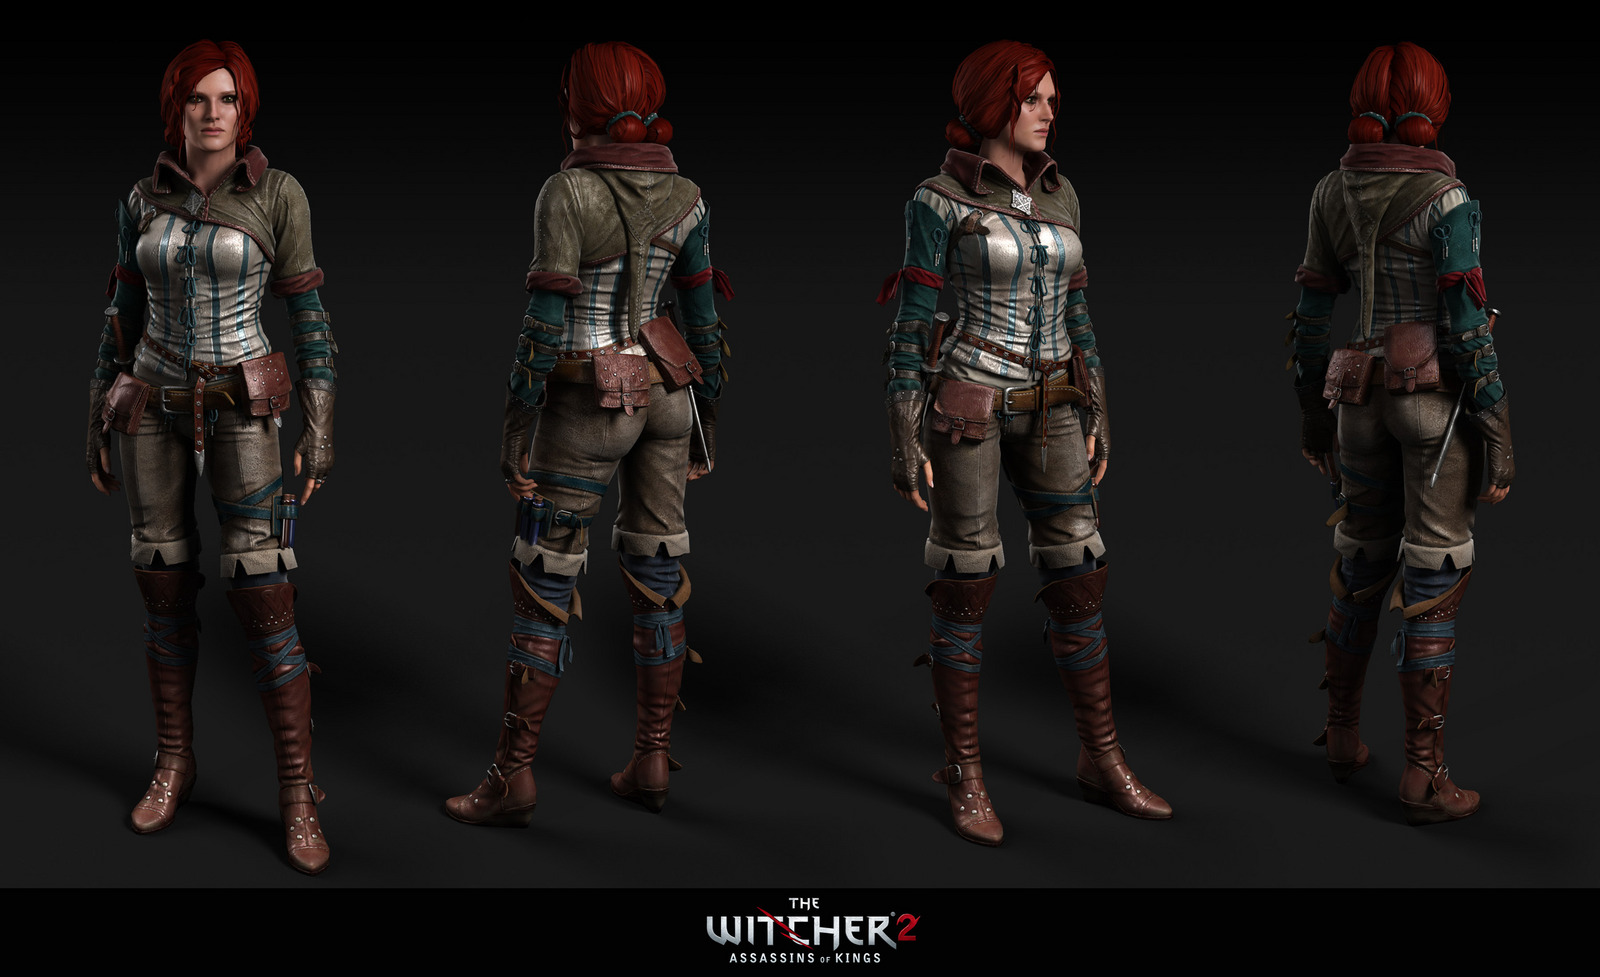 Witcher Triss Merigold And Geralt Of Rivia Cosplay Using Texture